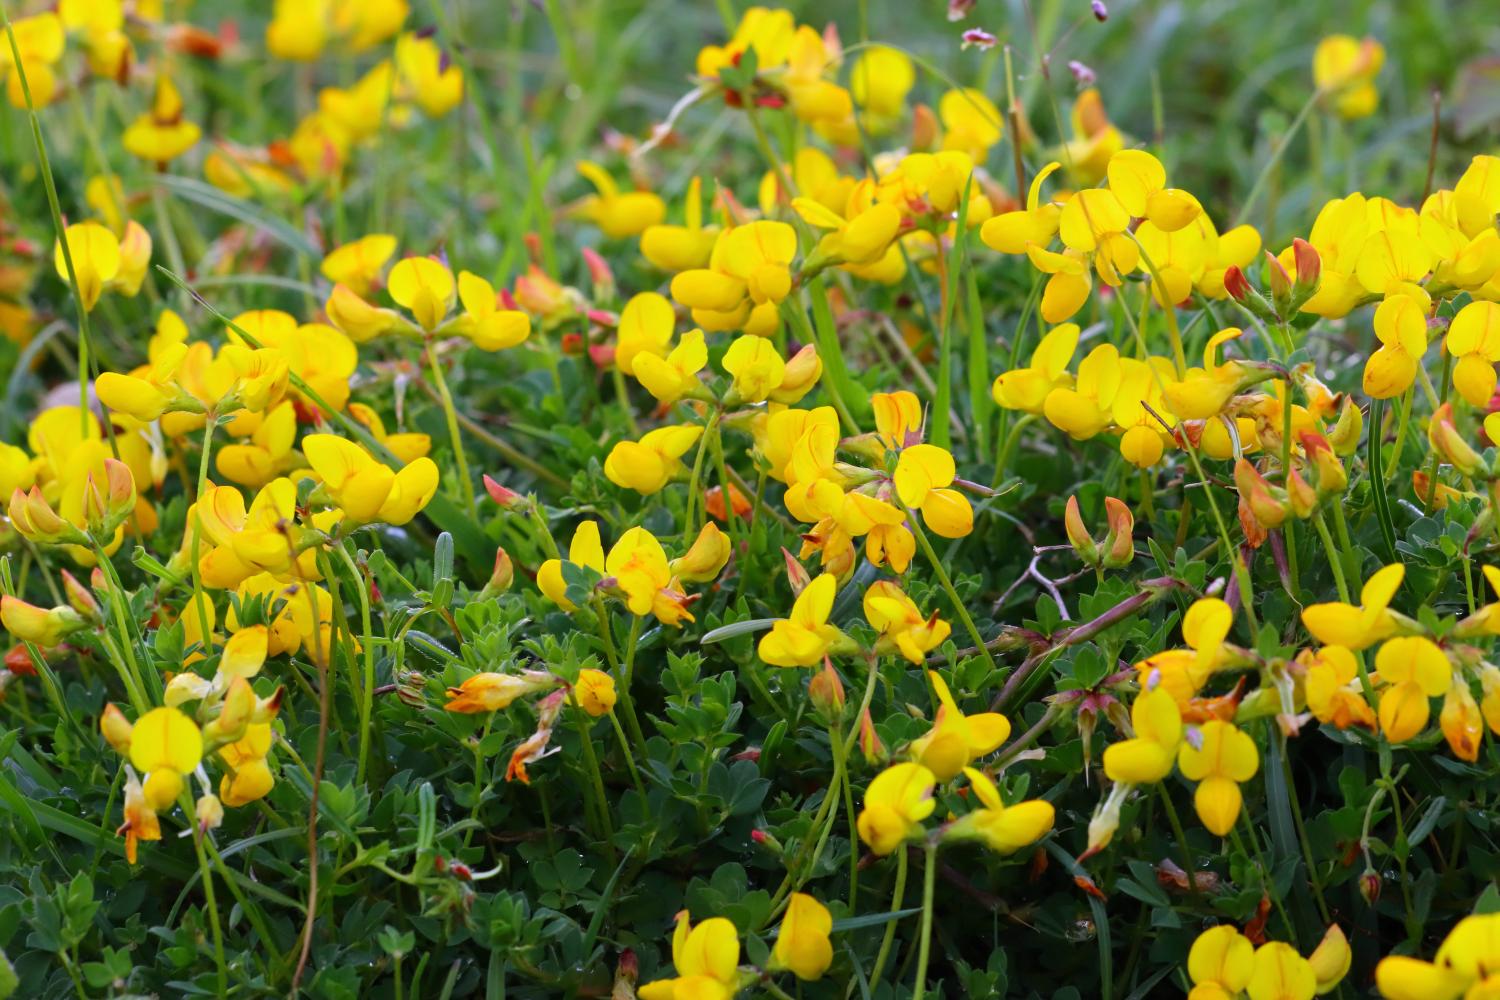 A cluster of yellow bird’s foot trefoil flowers growing in a lawn.